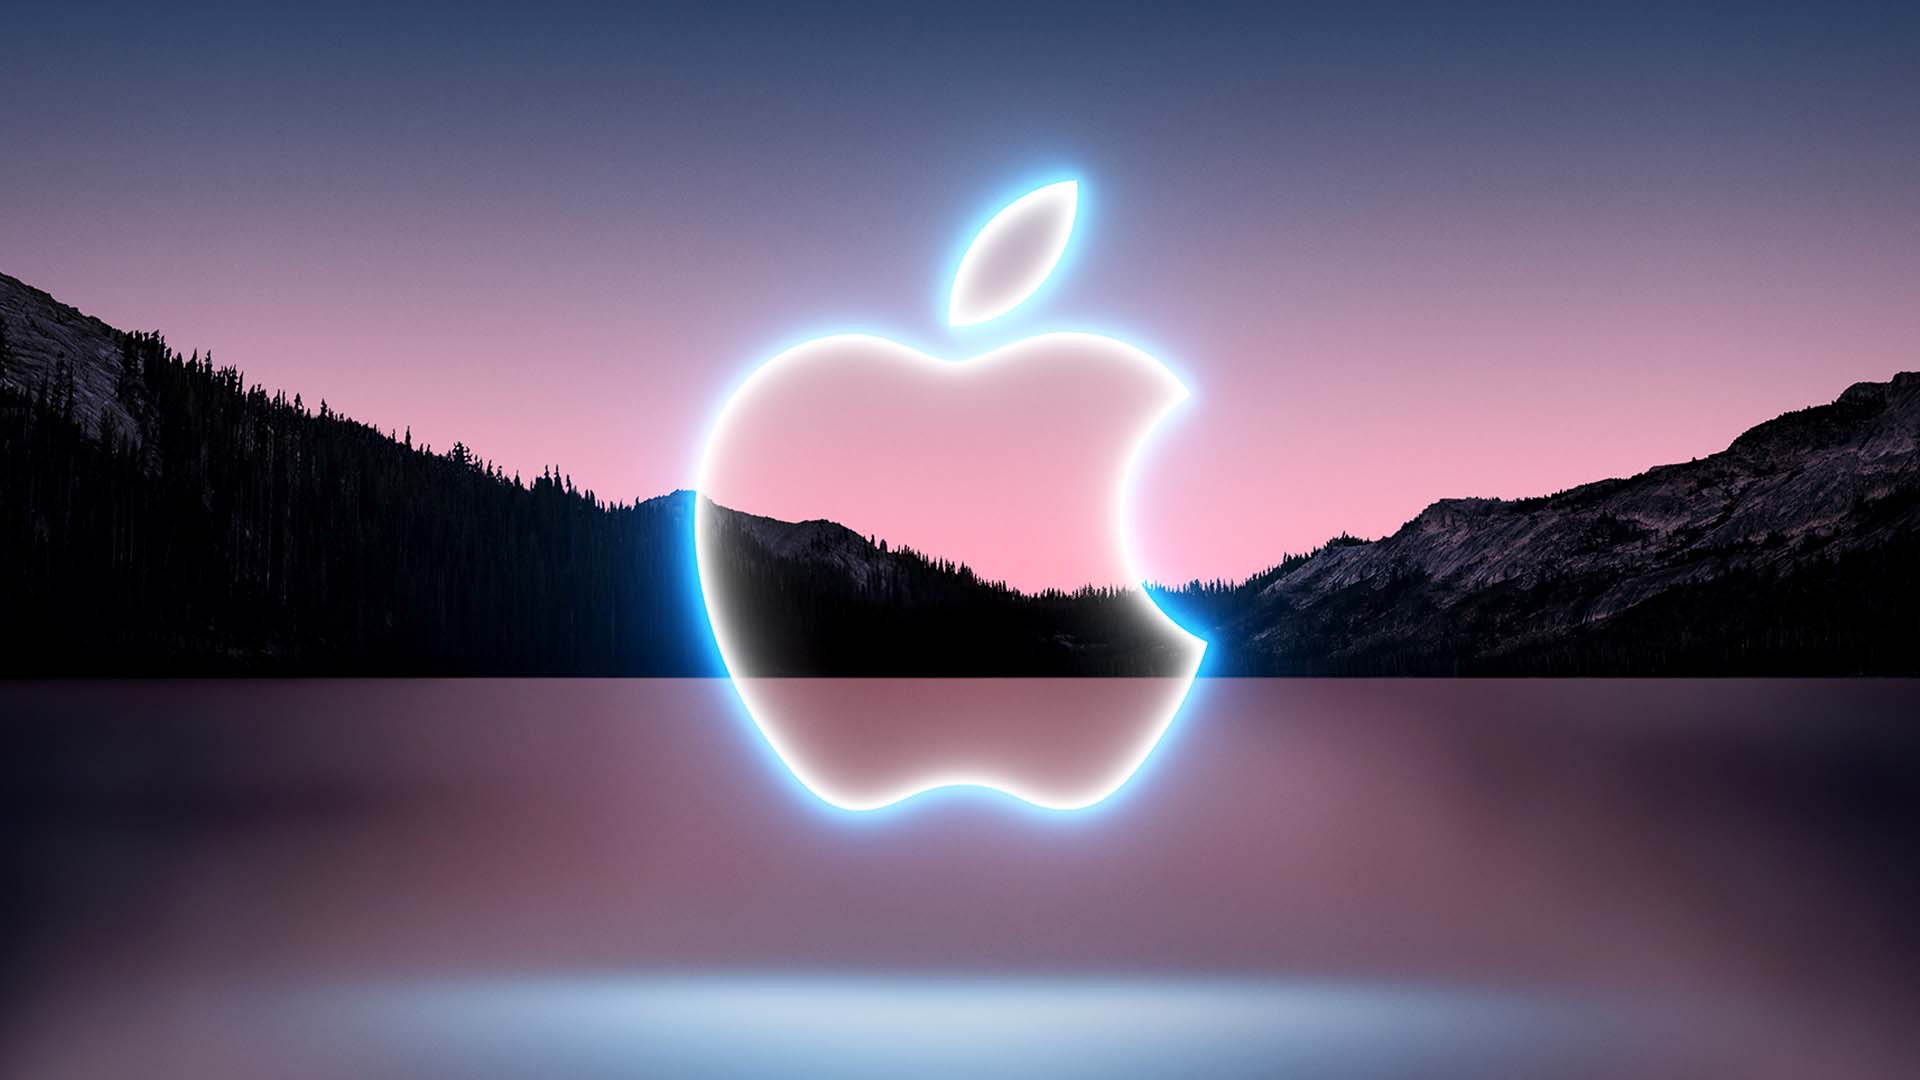 Apple's 2024 Event Plans: New Products Coming in 2024 - MacRumors